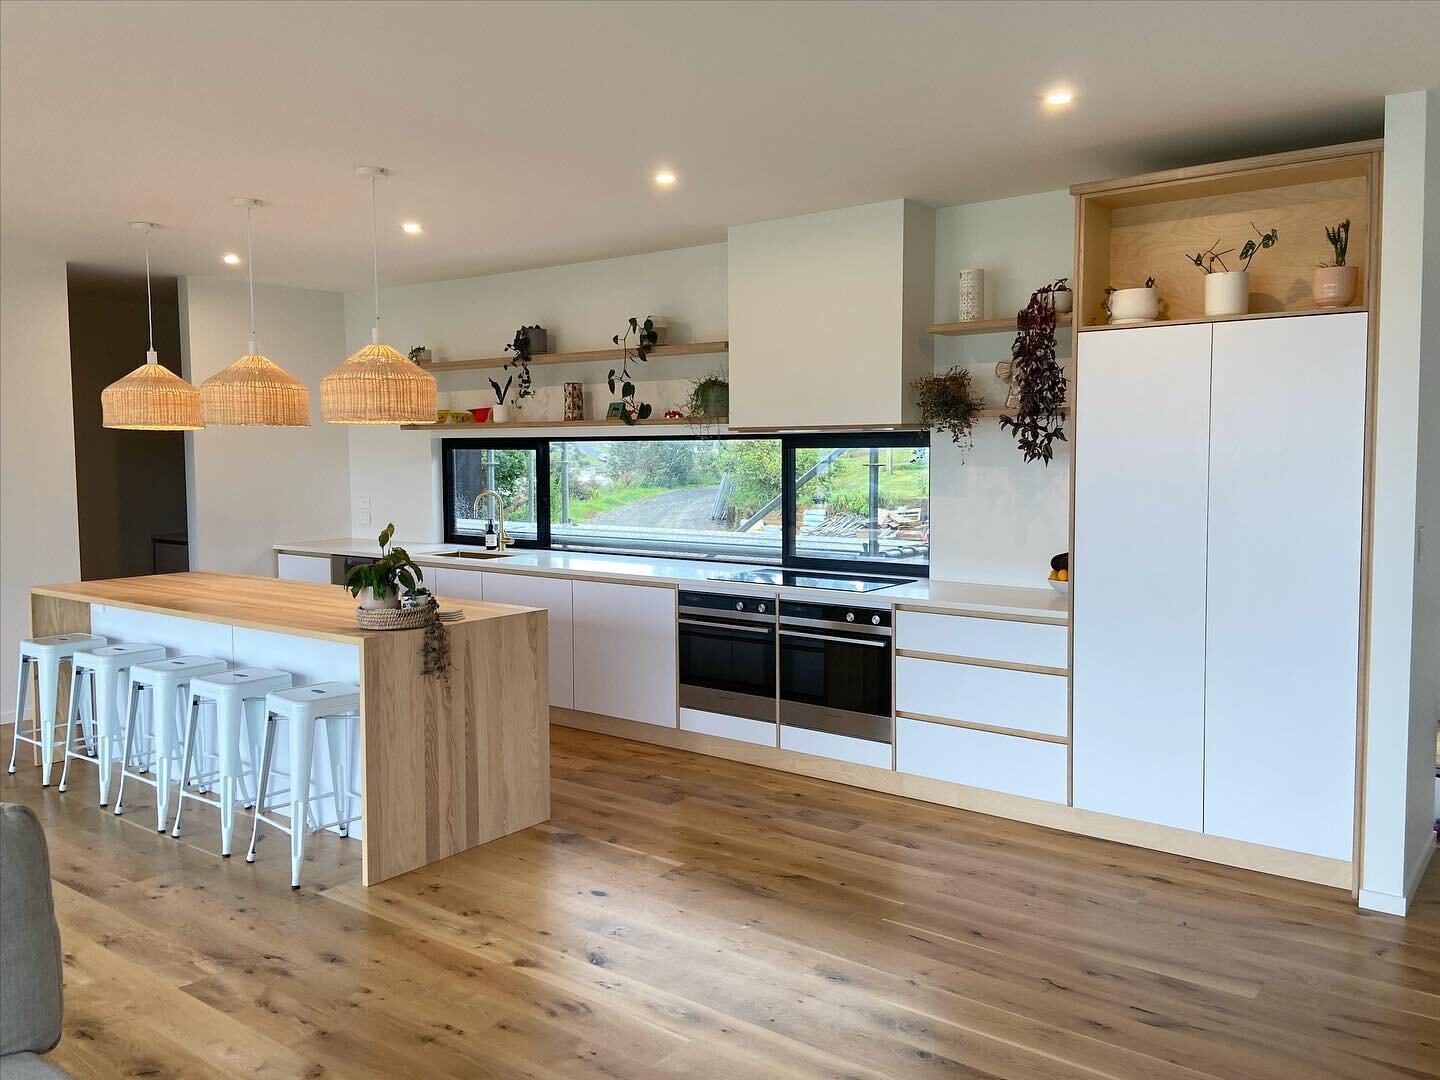 *Fresh and clean*
Crisp white door fronts accented beautifully by the birch ply end panels, kick boards and handless extrusions.. 
What a luxury to have all that space!
..
..
..
..
..
#kitchendesign #birchply #woodworks #waikato #raglannz #raglantown